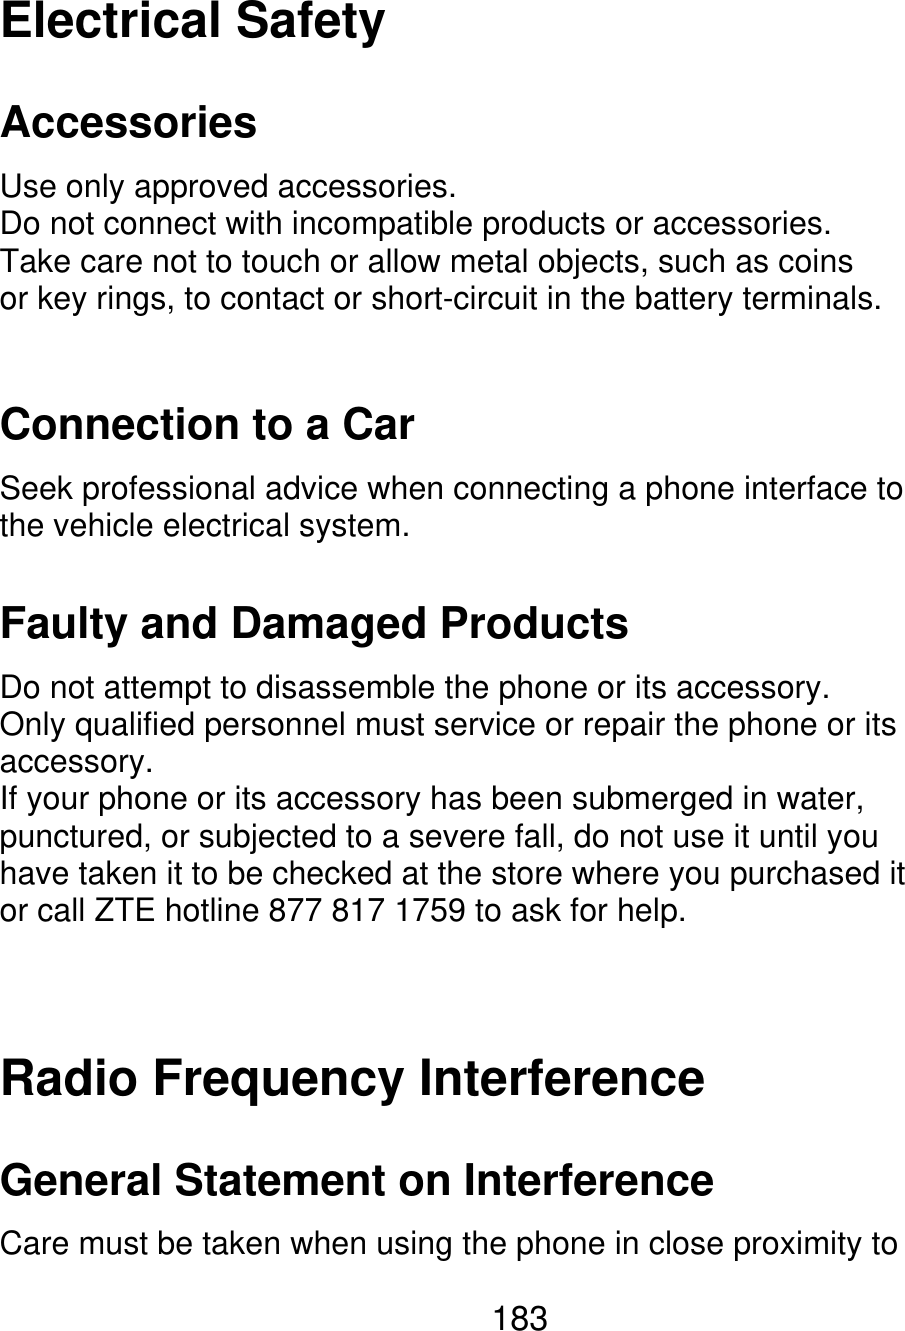 Electrical Safety Accessories Use only approved accessories. Do not connect with incompatible products or accessories. Take care not to touch or allow metal objects, such as coins or key rings, to contact or short-circuit in the battery terminals. Connection to a Car Seek professional advice when connecting a phone interface to the vehicle electrical system. Faulty and Damaged Products Do not attempt to disassemble the phone or its accessory. Only qualified personnel must service or repair the phone or its accessory. If your phone or its accessory has been submerged in water, punctured, or subjected to a severe fall, do not use it until you have taken it to be checked at the store where you purchased it or call ZTE hotline 877 817 1759 to ask for help. Radio Frequency Interference General Statement on Interference Care must be taken when using the phone in close proximity to 183 